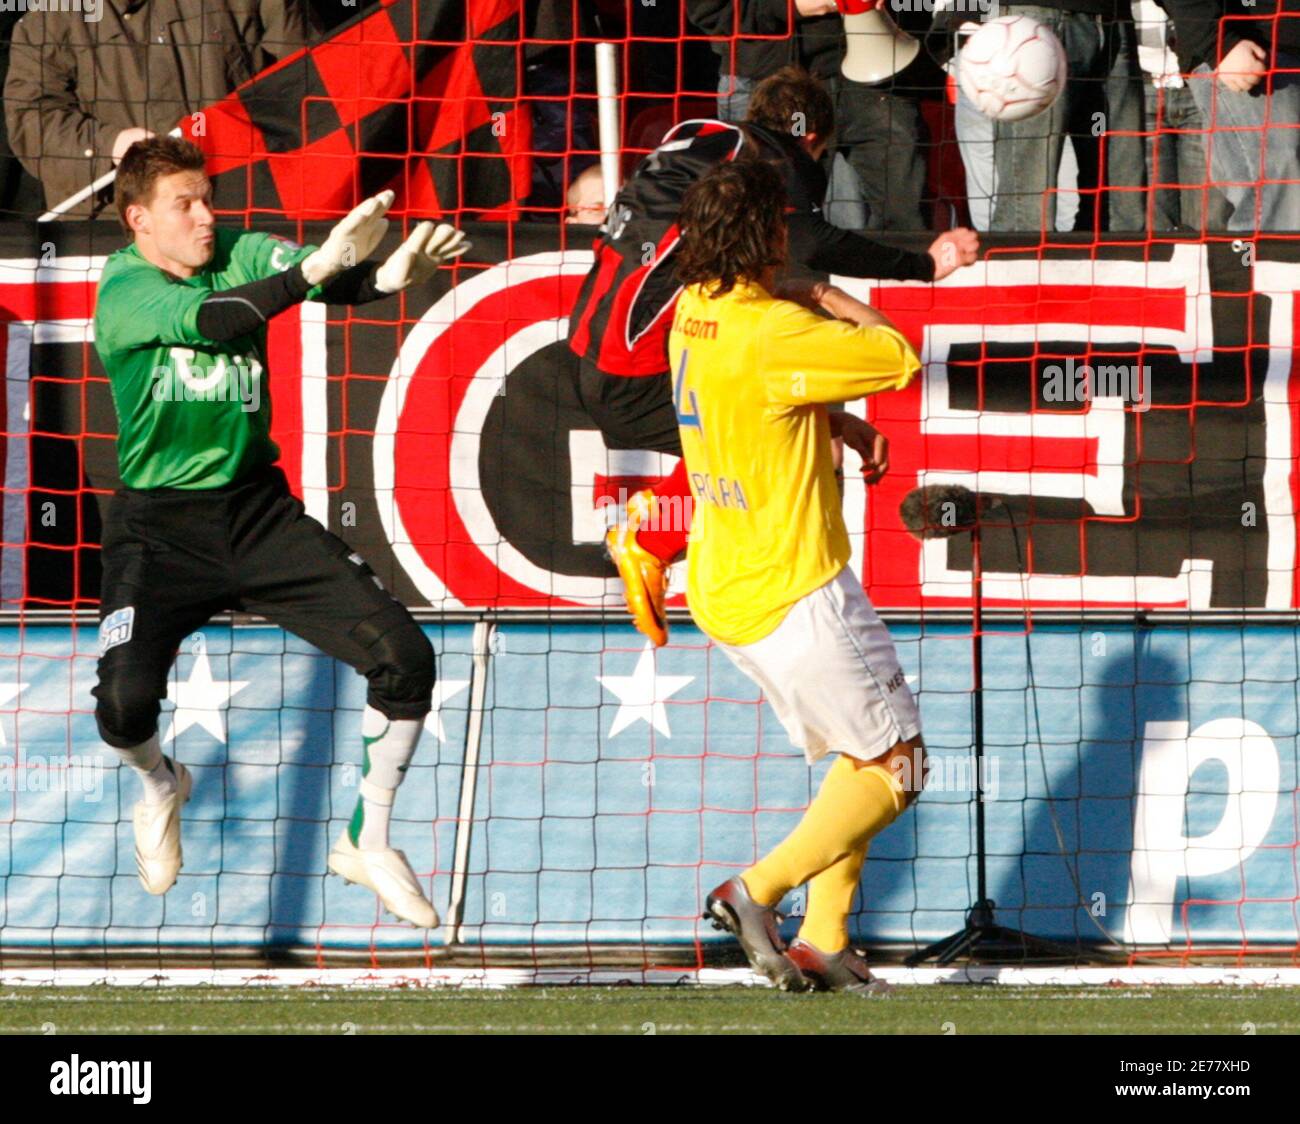 FC Xamax's Steven Lang (C) scores first goal to FC Zurich's goalkeeper  Johnny Leoni (L) and team mate Adan Vergara during their Swiss Super League  soccer match in Neuchatel March 22, 2008.